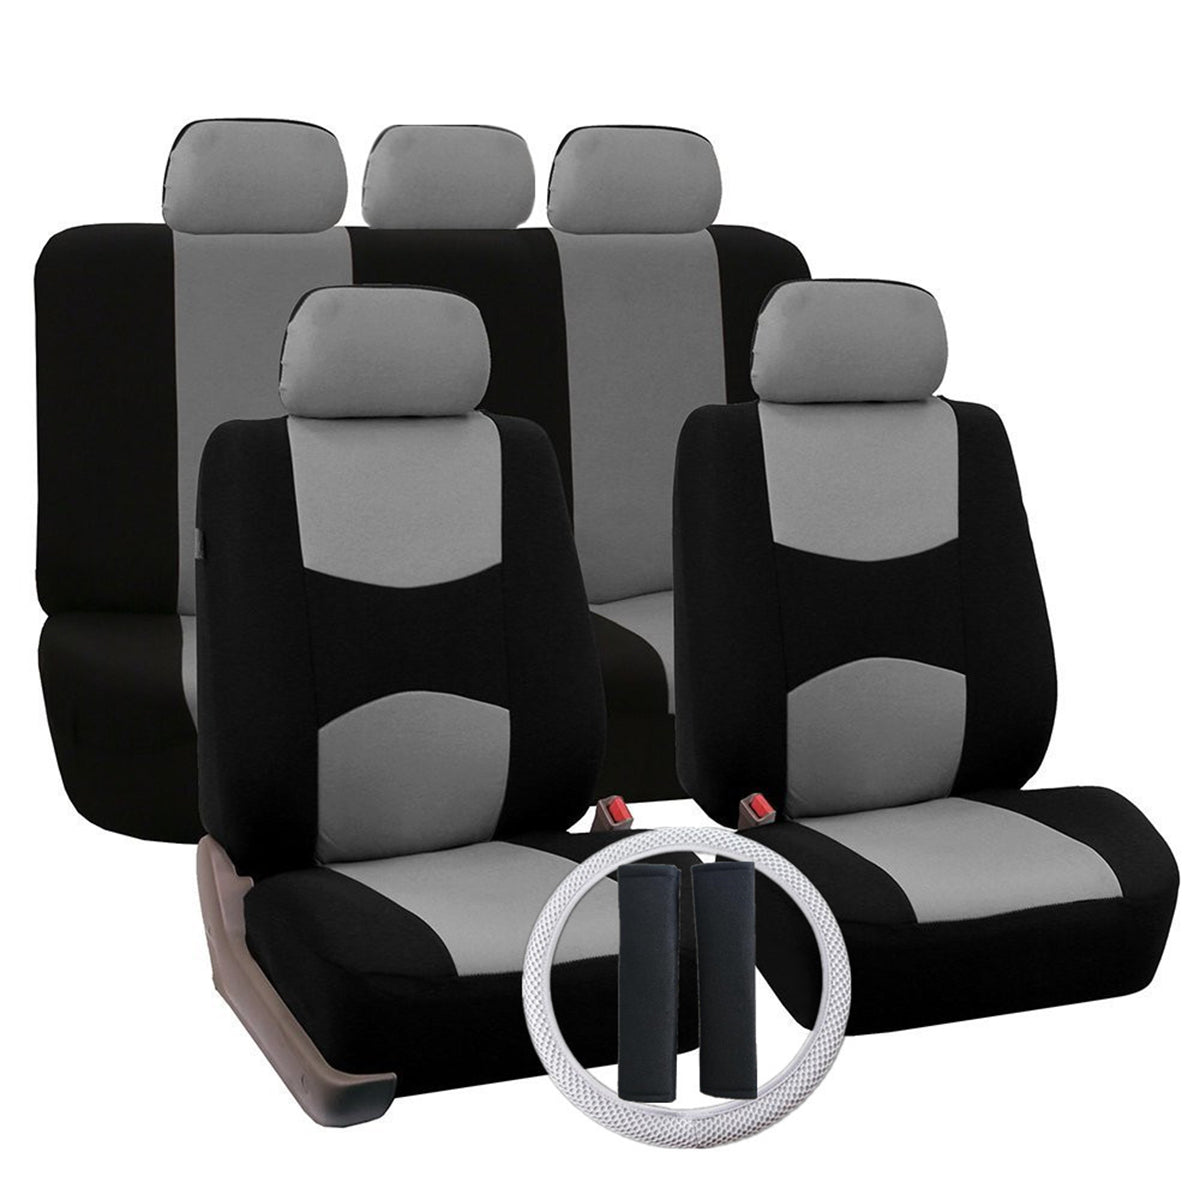 12 PCS Universal Vehicle Car Seat Cover with Headrest Steering Wheel Protector - Auto GoShop